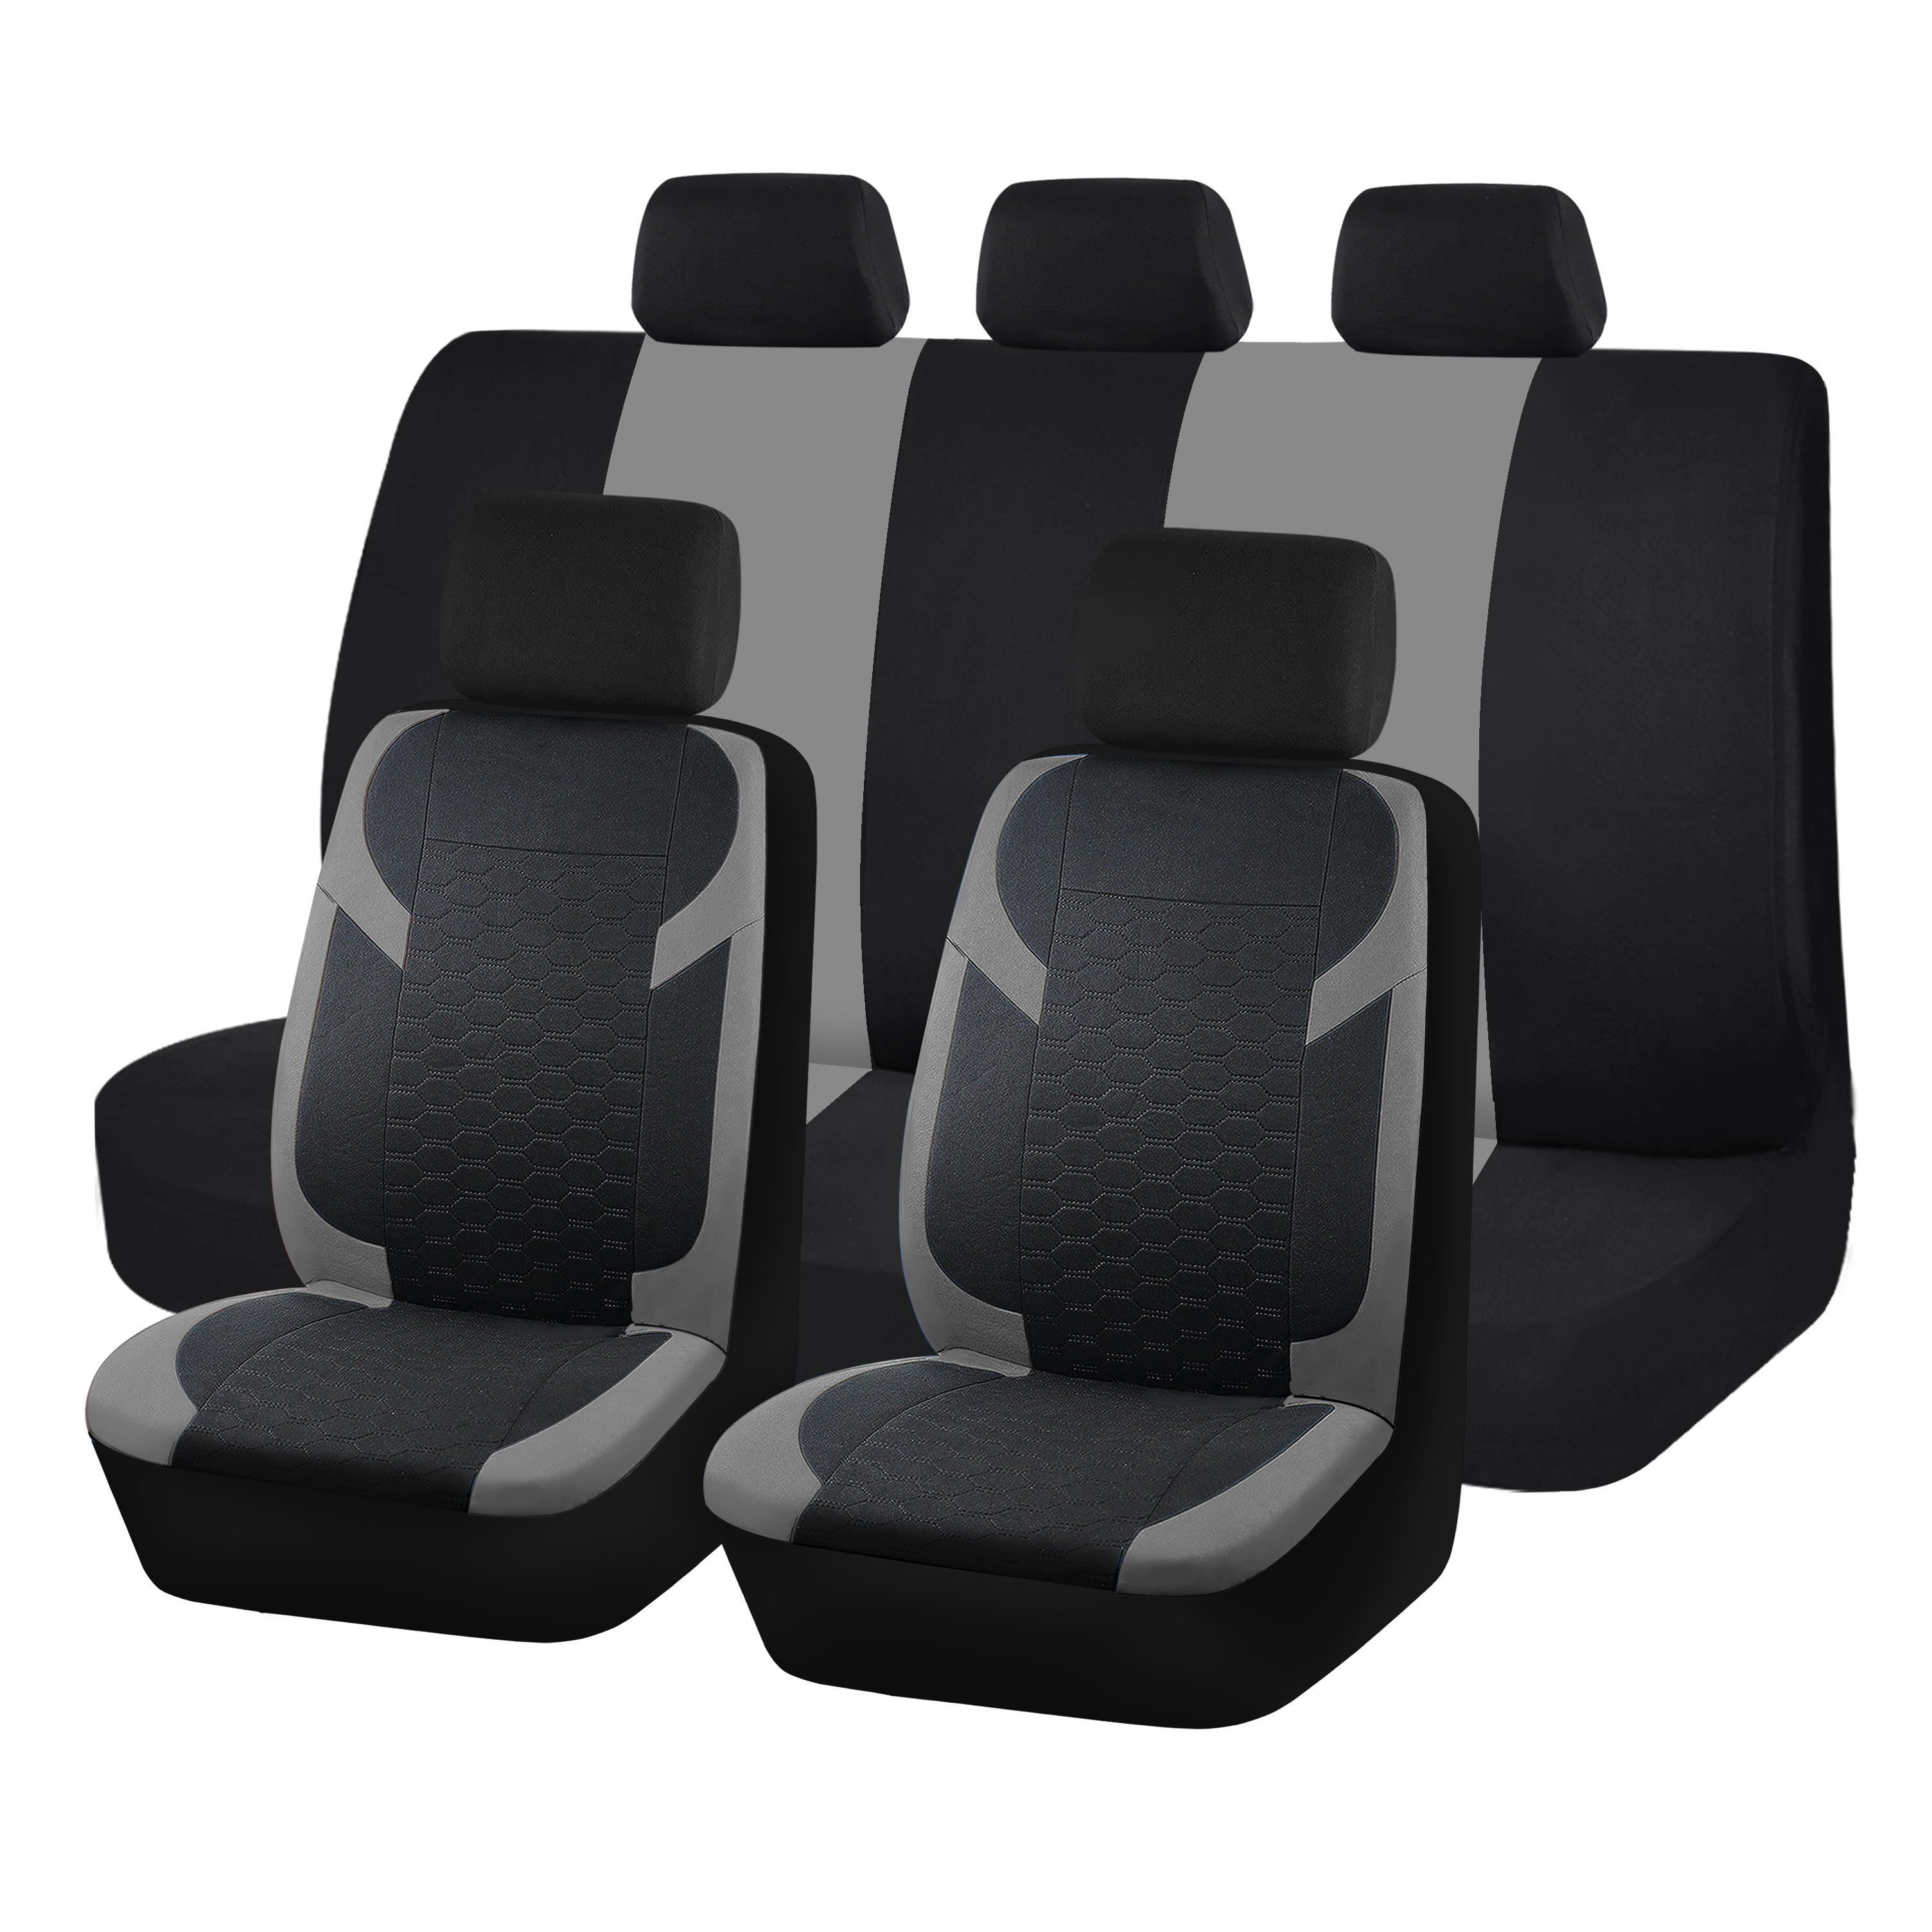 Universal Car Seat Protector Car Seat Covers Warm Seat Cushion funda asiento  coche Cubre asiento auto Cruze Car back cushion